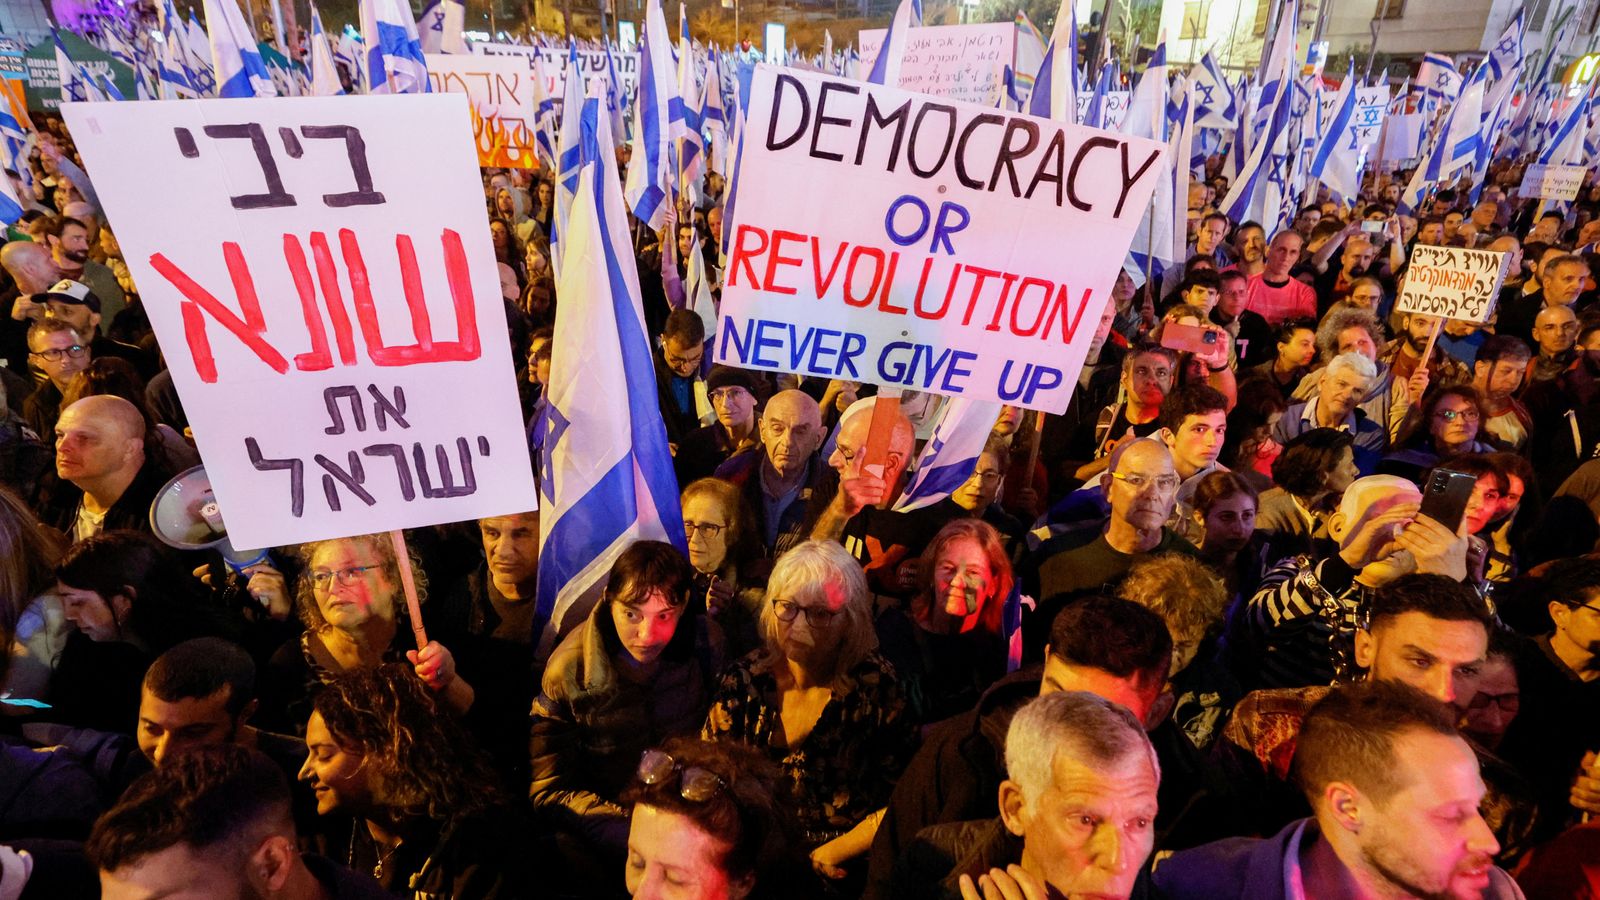 Israelis protest Netanyahu's legal overhaul plans for ninth week in a row